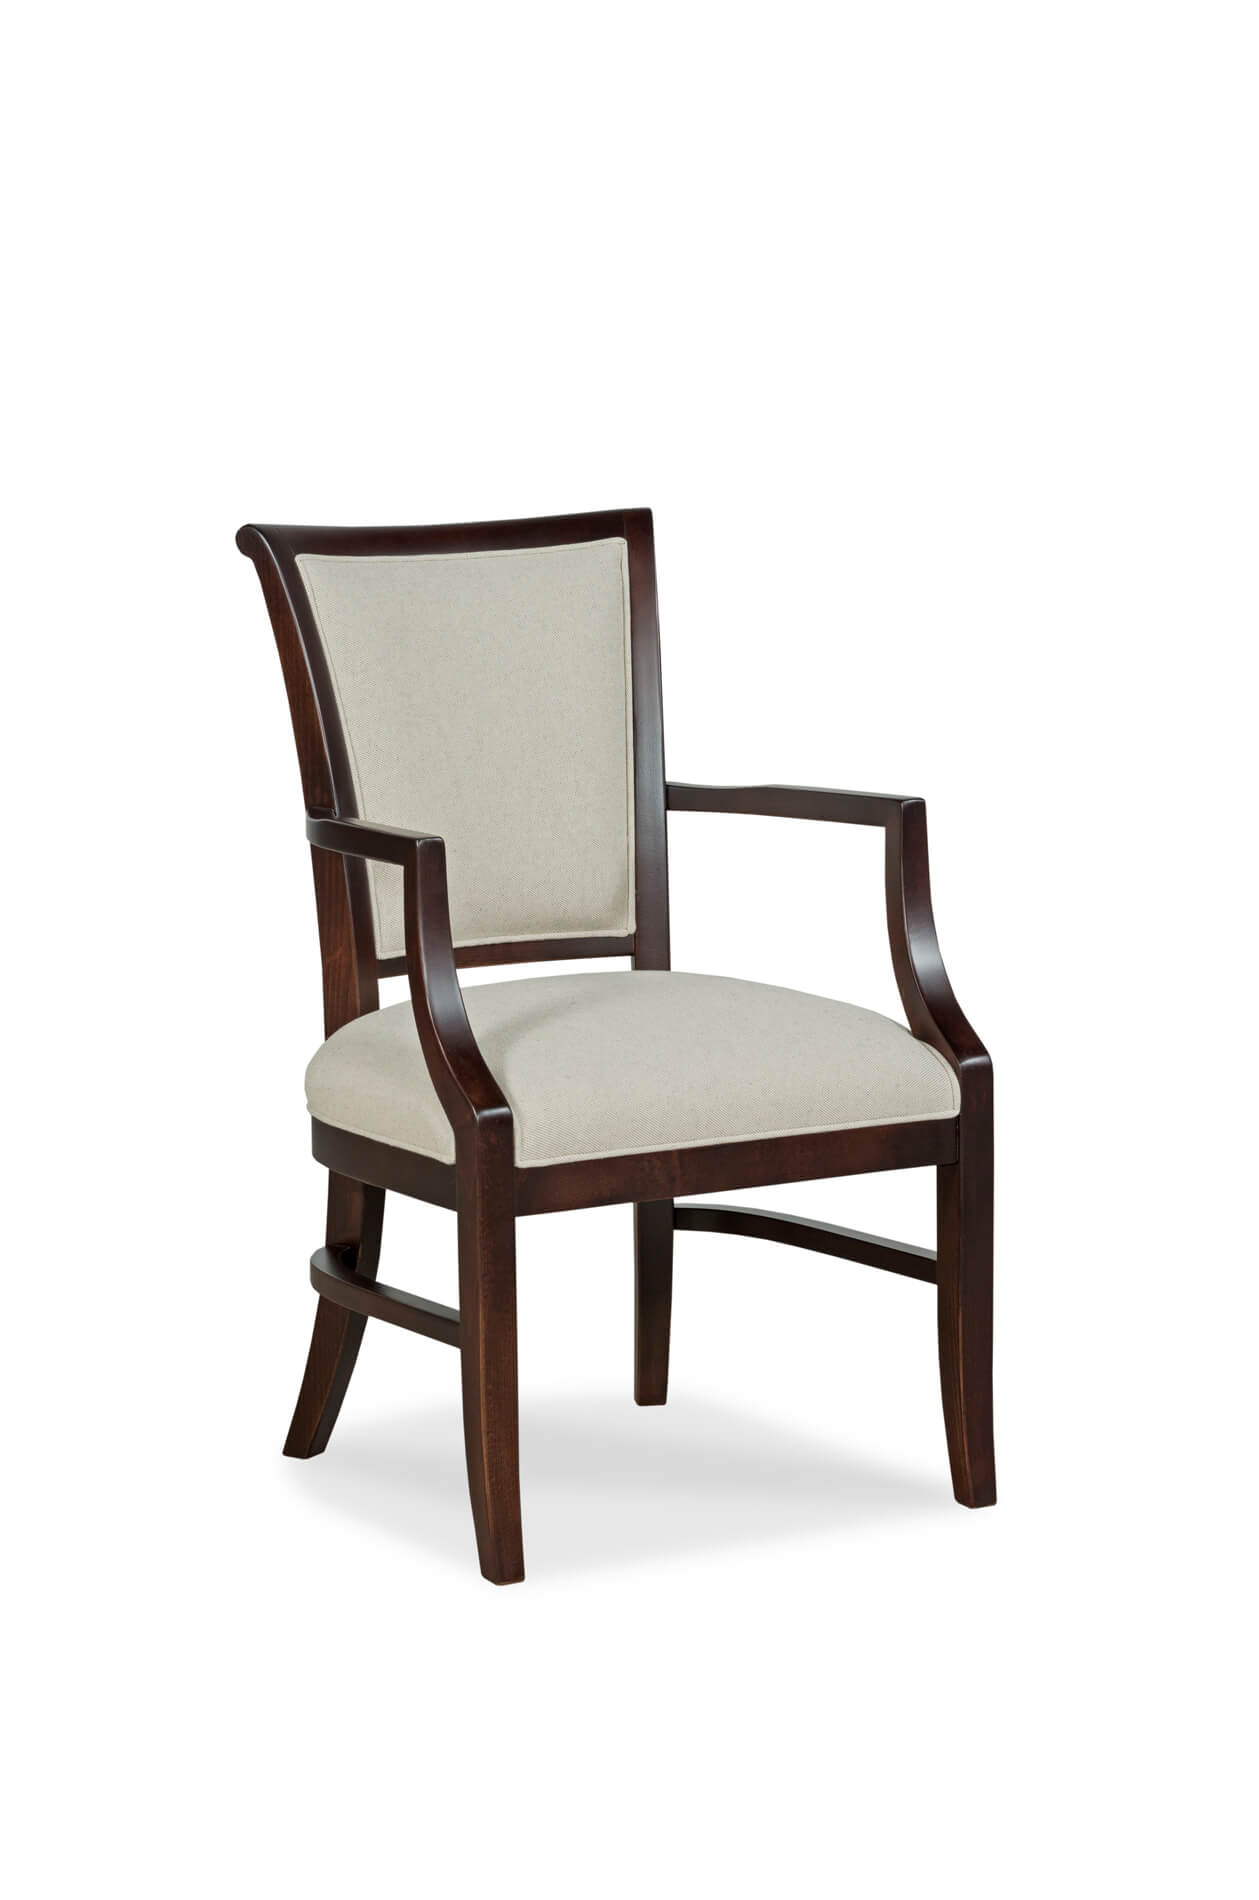 Fairfield's Mackay Upholstered Dining Arm Chair